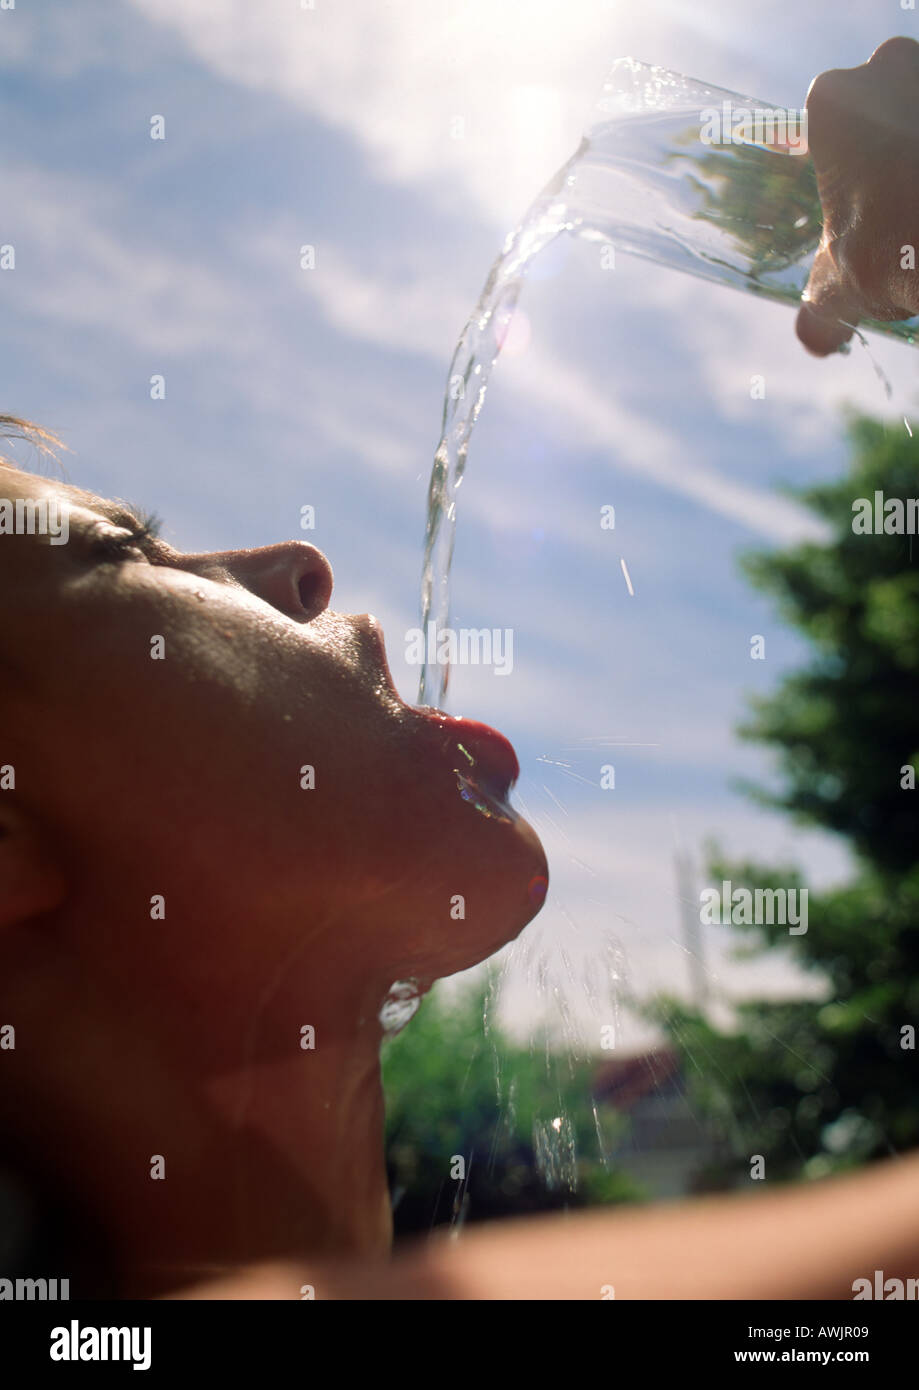 Woman pouring water into mouth under sun Stock Photo